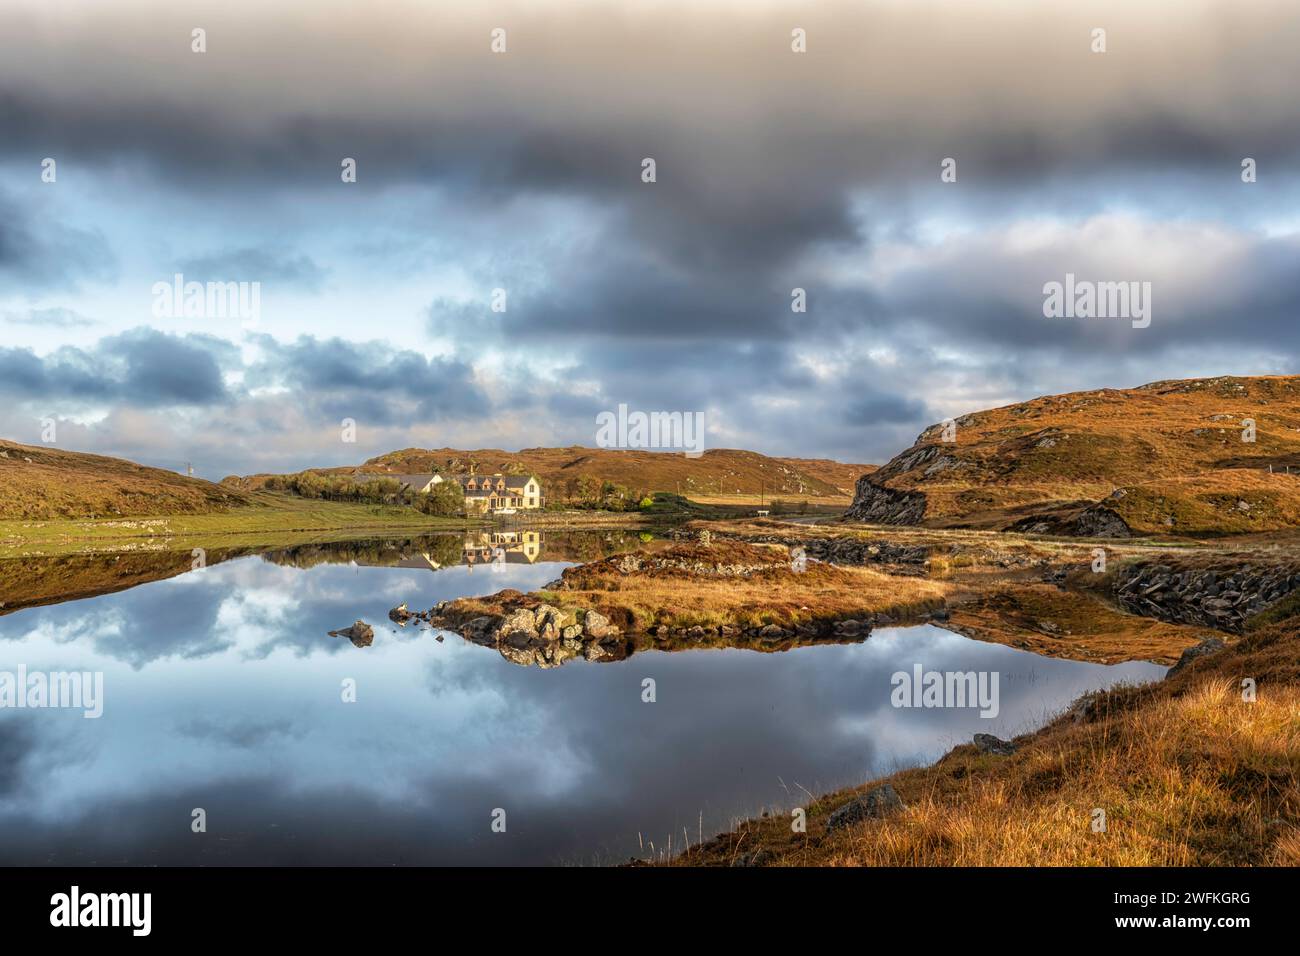 The Doune Braes Hotel in the township of Carloway reflected in the calm and still waters of Loch an Dunain on the Isle of Lewis in the Outer Hebrides. Stock Photo